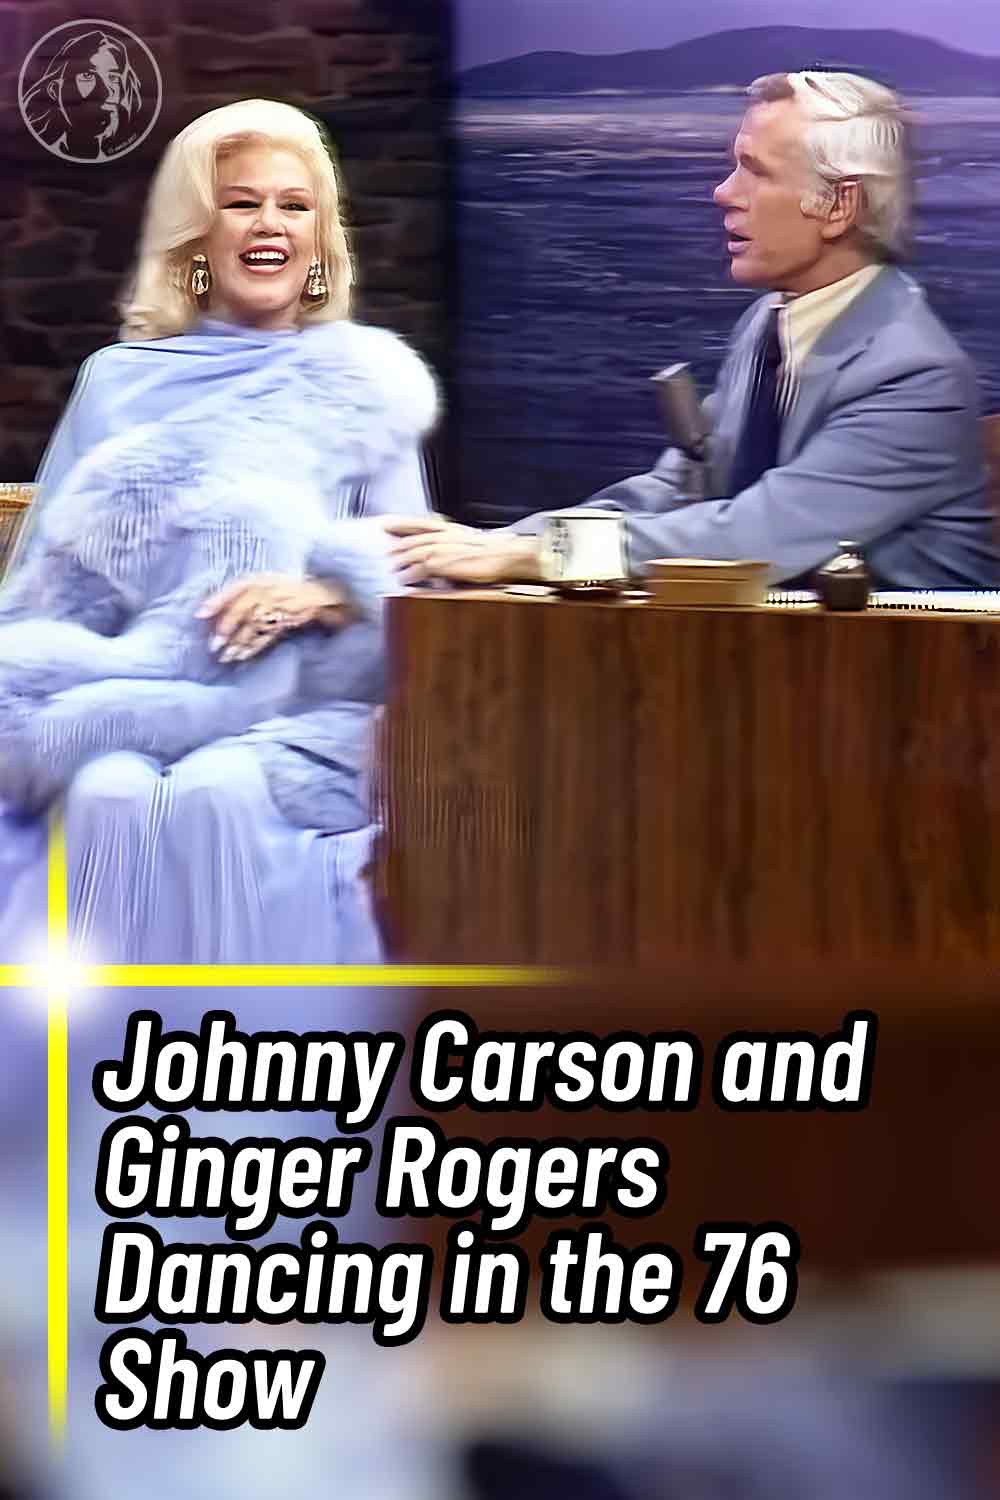 Johnny Carson and Ginger Rogers Dancing in the 76 Show